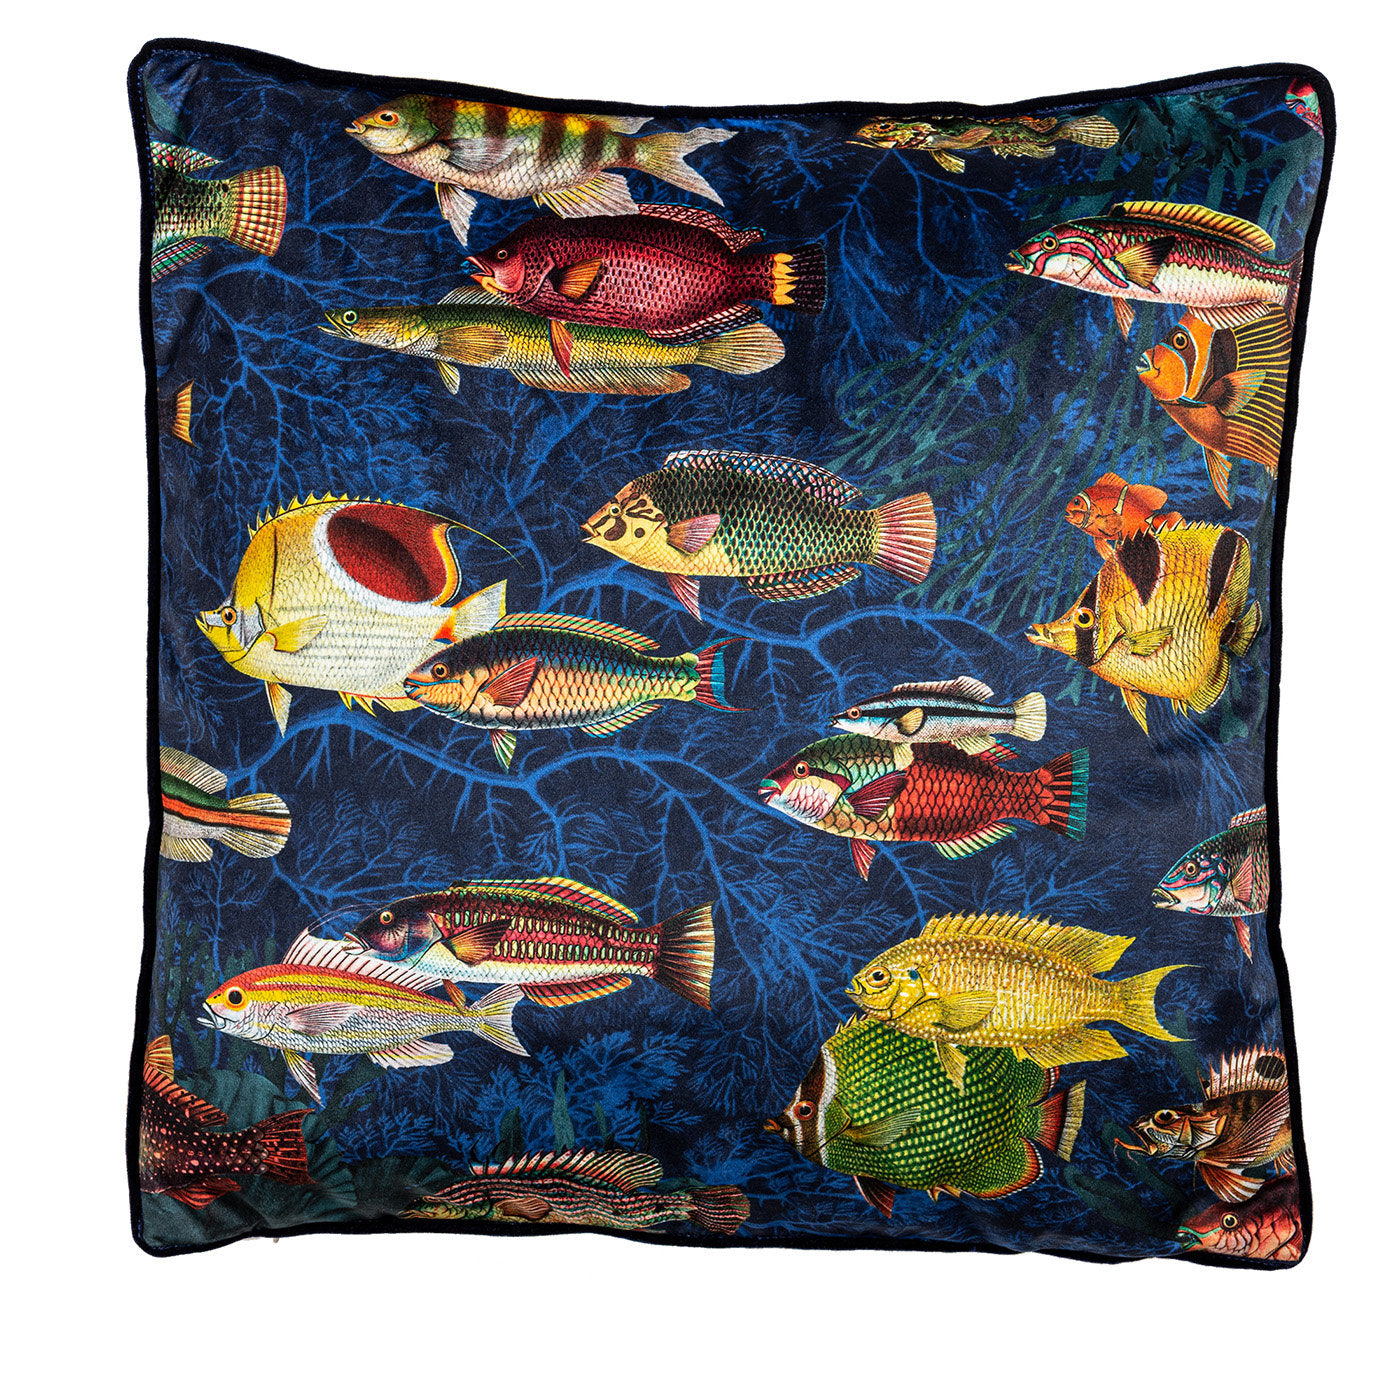 Amami Islands Velvet Cushion With Tropical Fish #3 - Main view